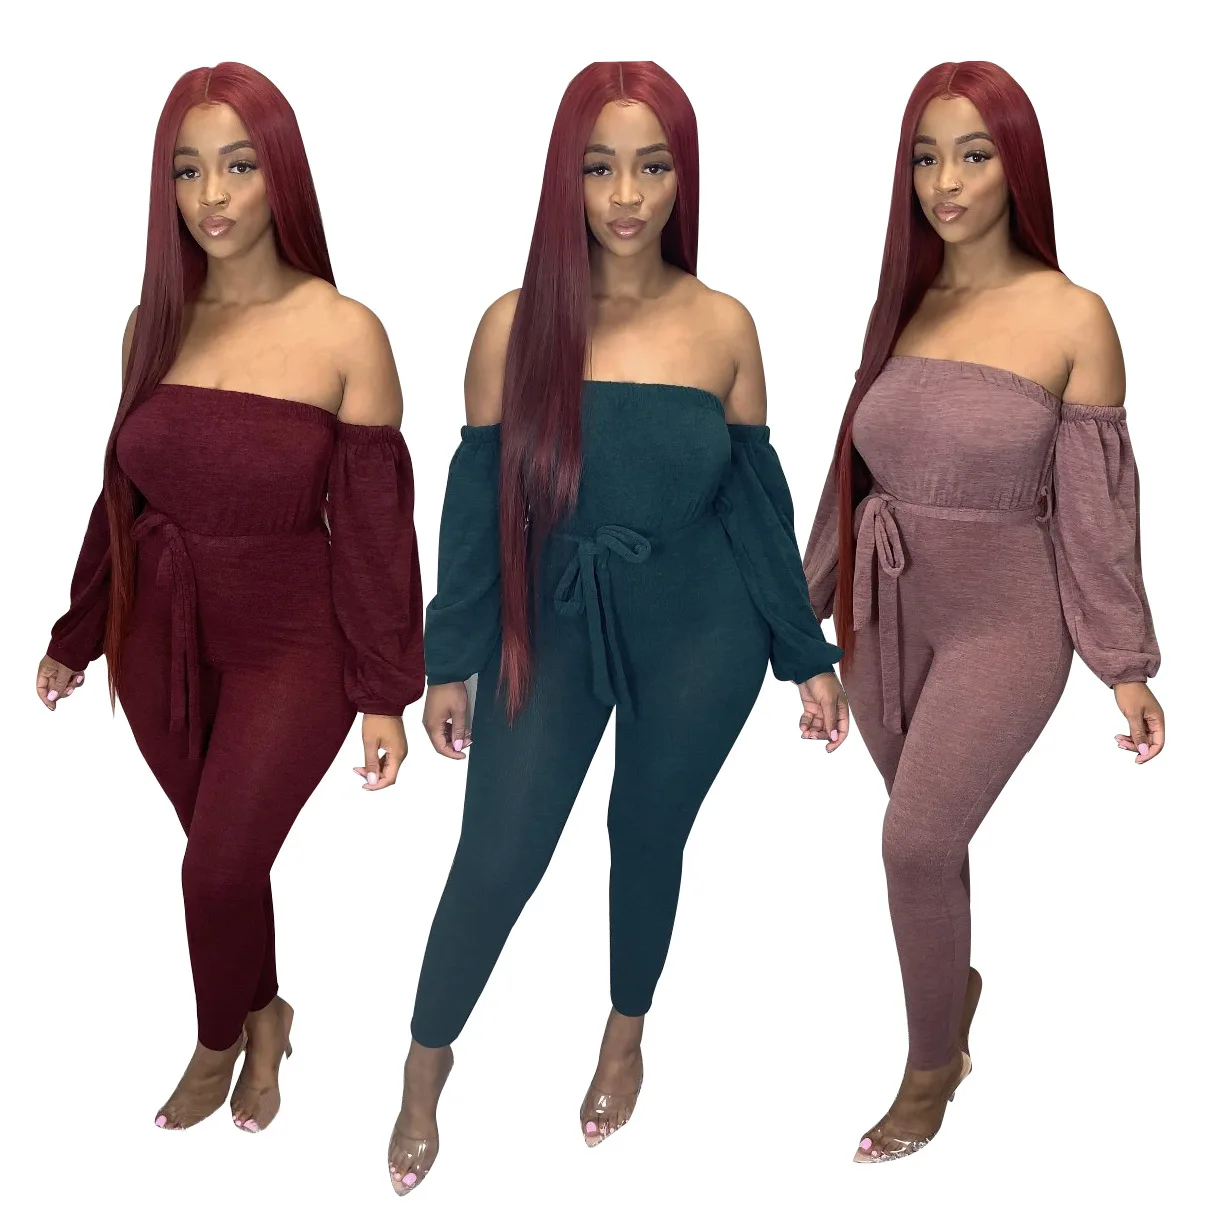 

2021 spring autumn Casual Loose Solid off the shoulder jumpsuit women 3xl long sleeve women Sexy Plus Size off shoulder jumpsuit, Red,blue cheap flare solid jumpsuit for women